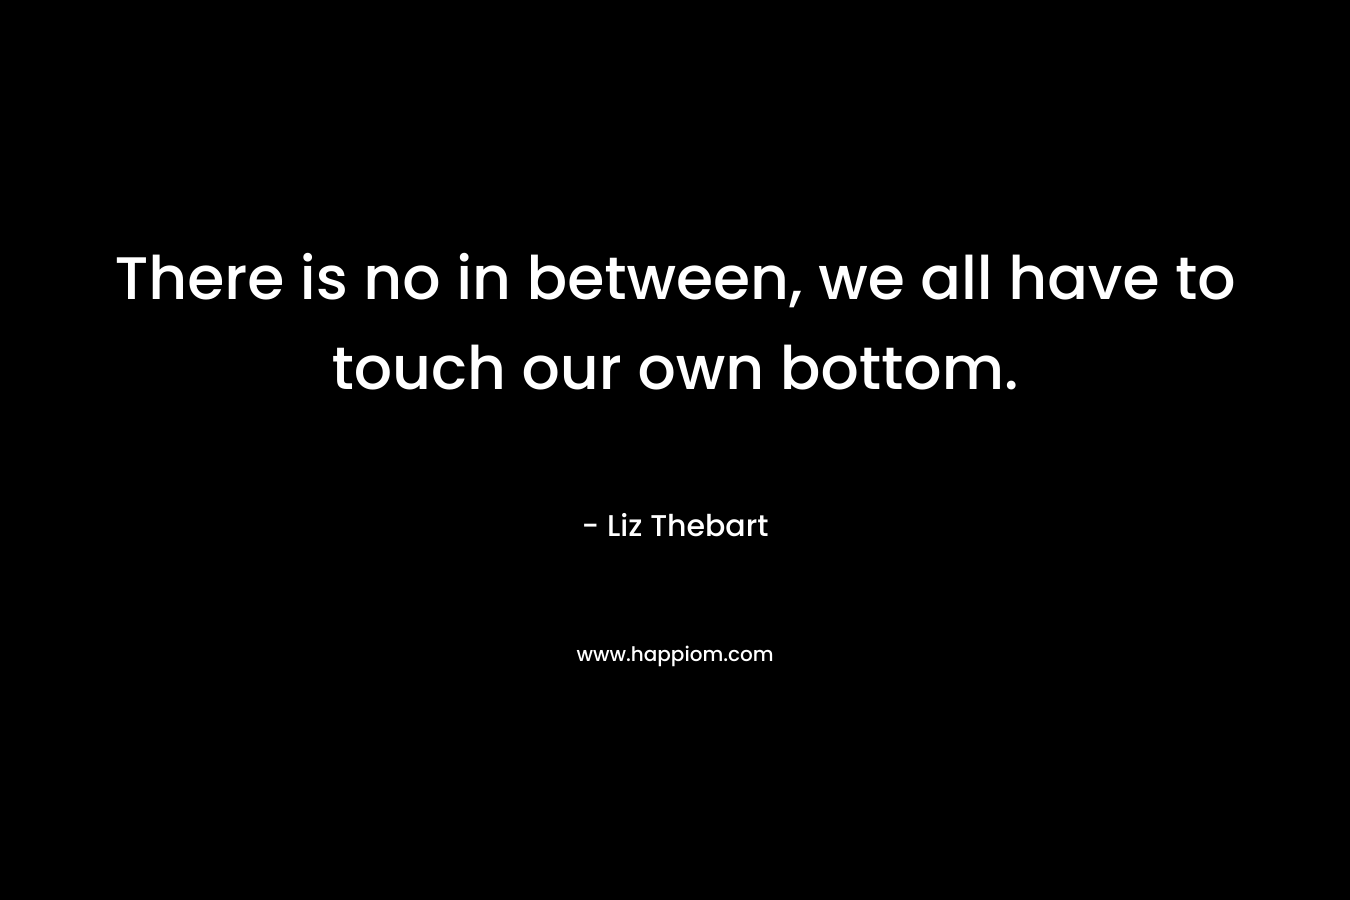 There is no in between, we all have to touch our own bottom. – Liz Thebart